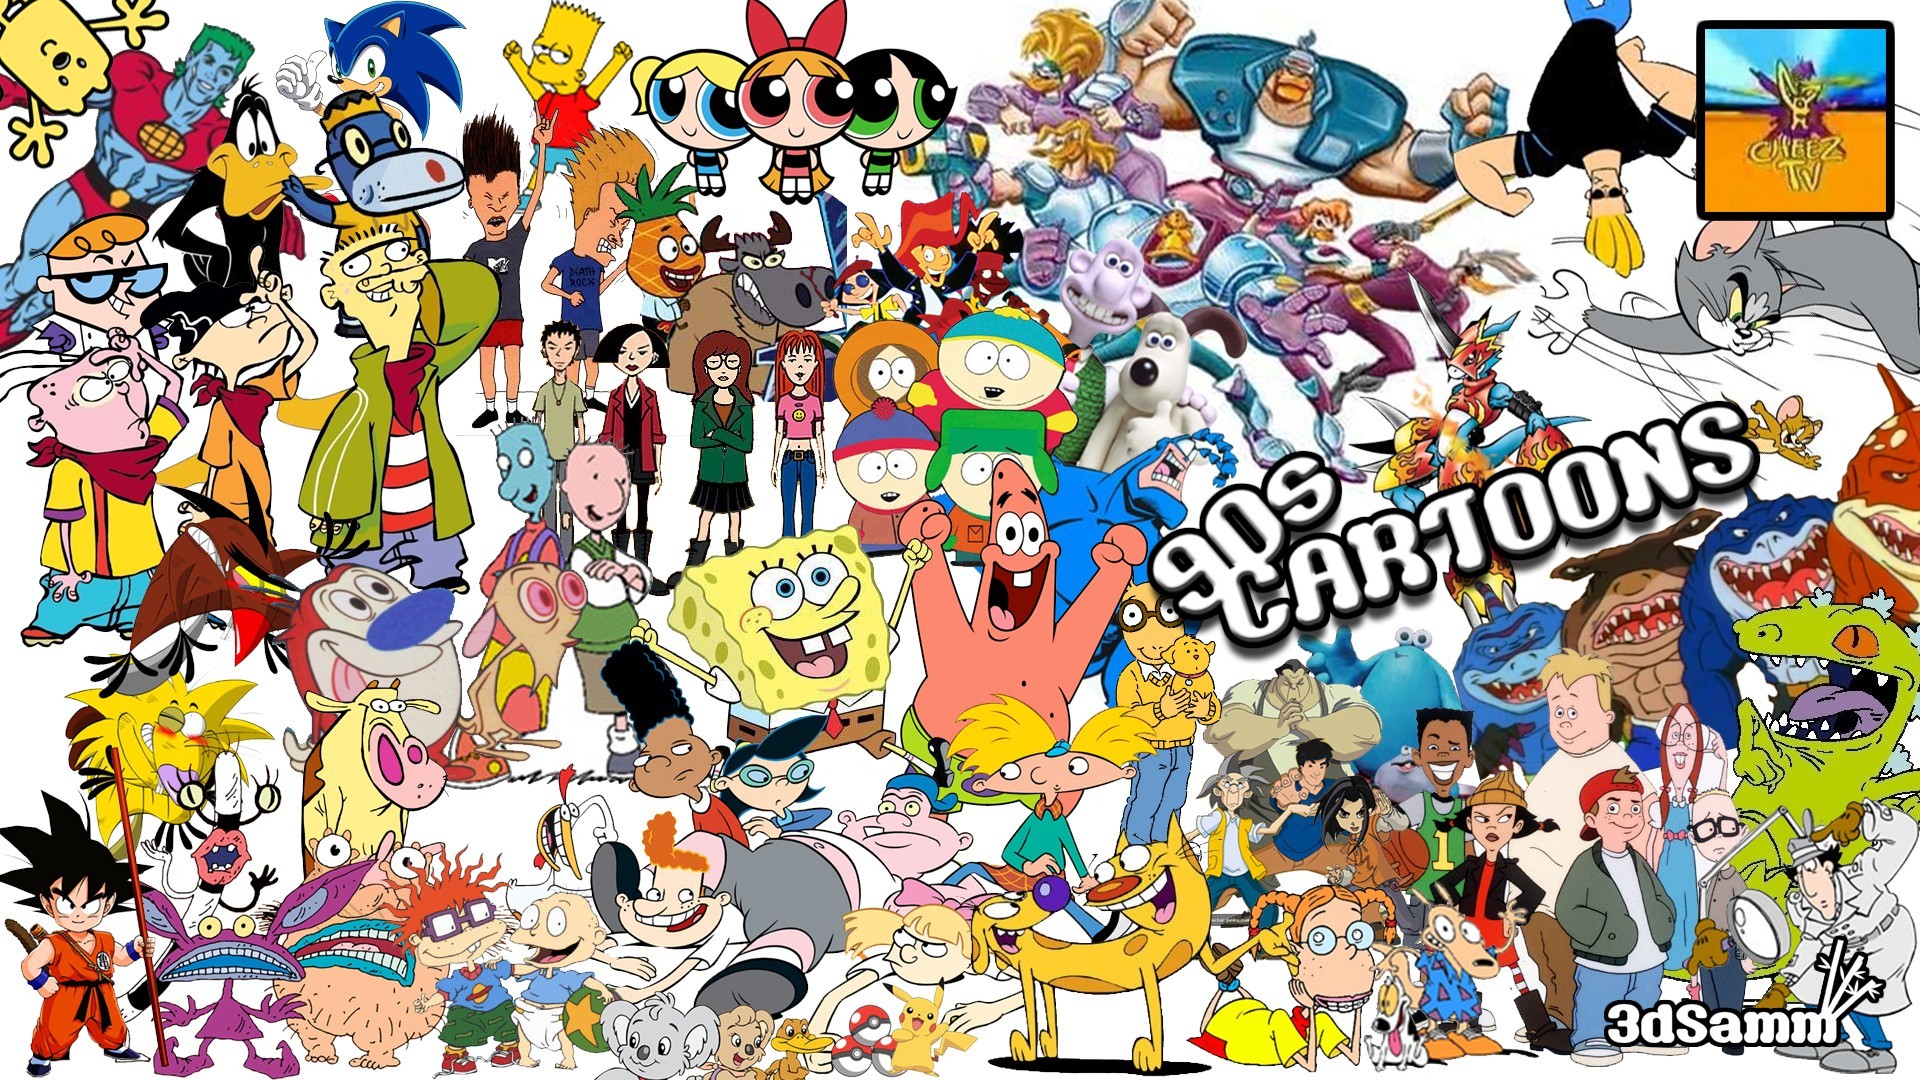 1920x1080 Cartoon Network Wallpapers Hd Awesome All Cartoons Wallpapers Group with 79  Items Of Cartoon Network Wallpapers